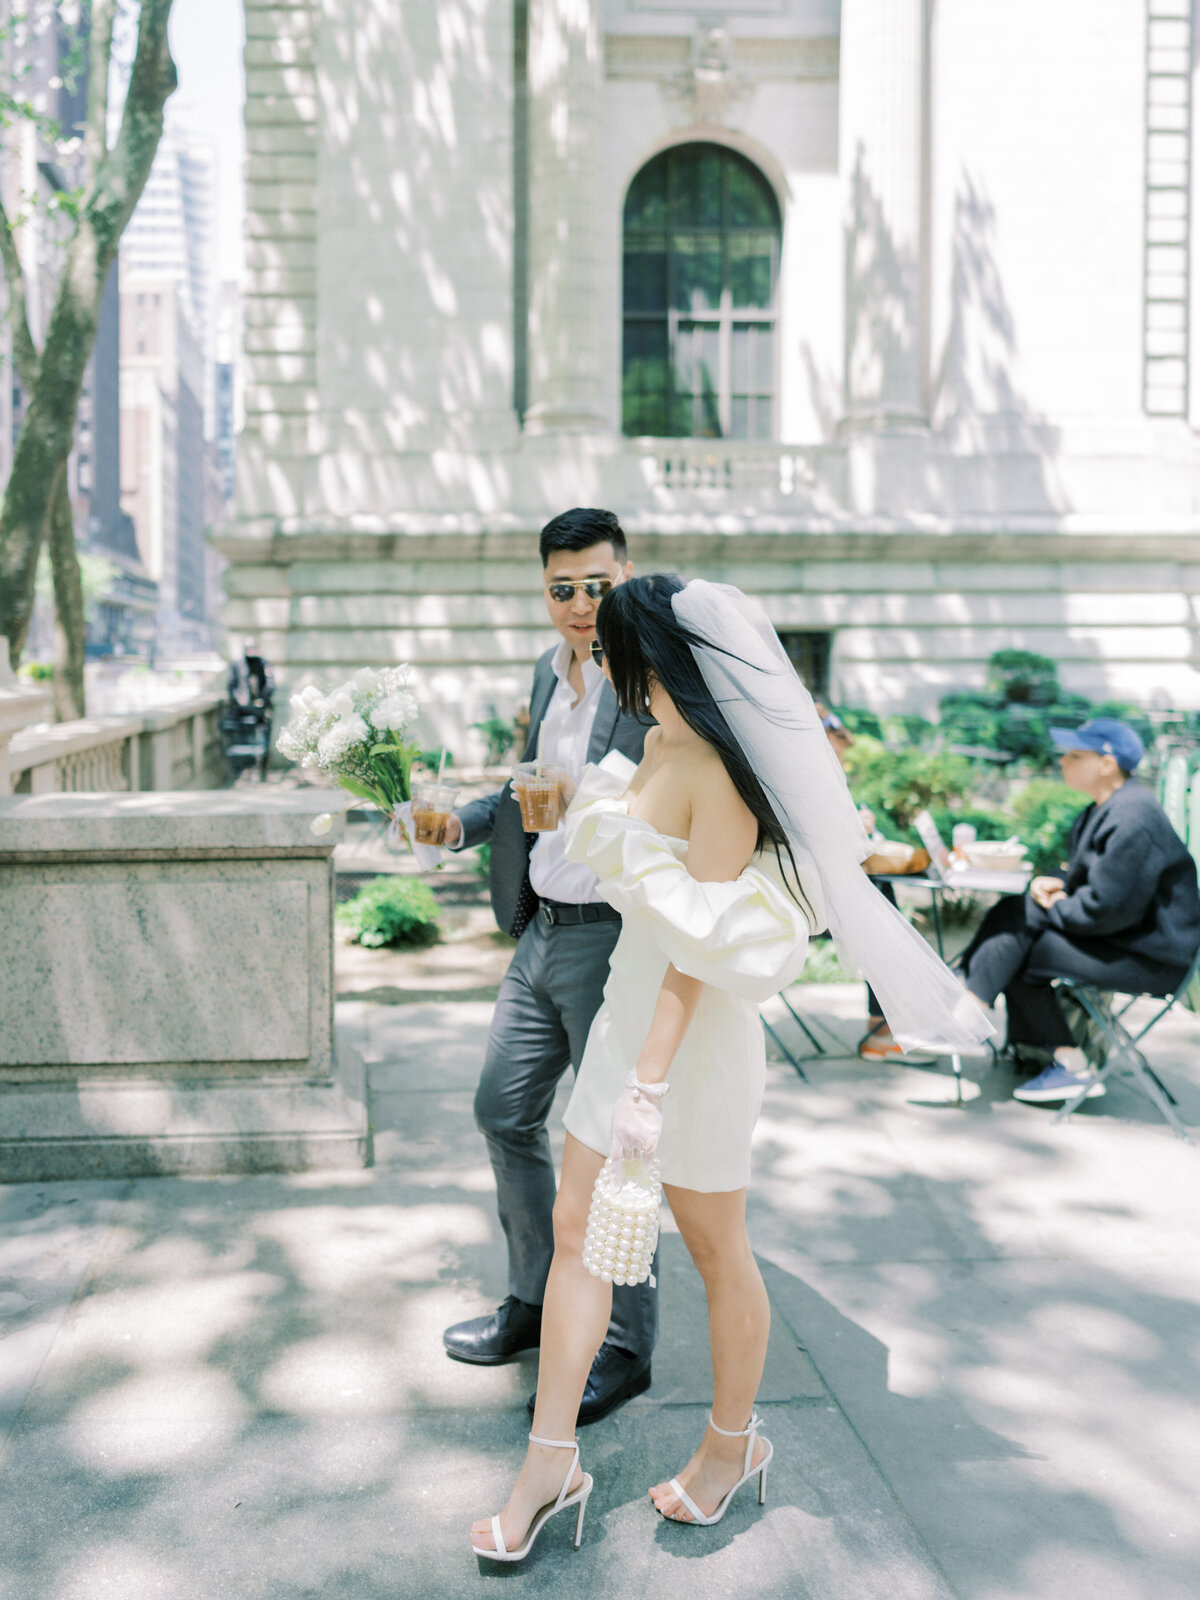 Vogue Editiorial NYC Elopement Themed Engagement Session Highlights | Amarachi Ikeji Photography 39